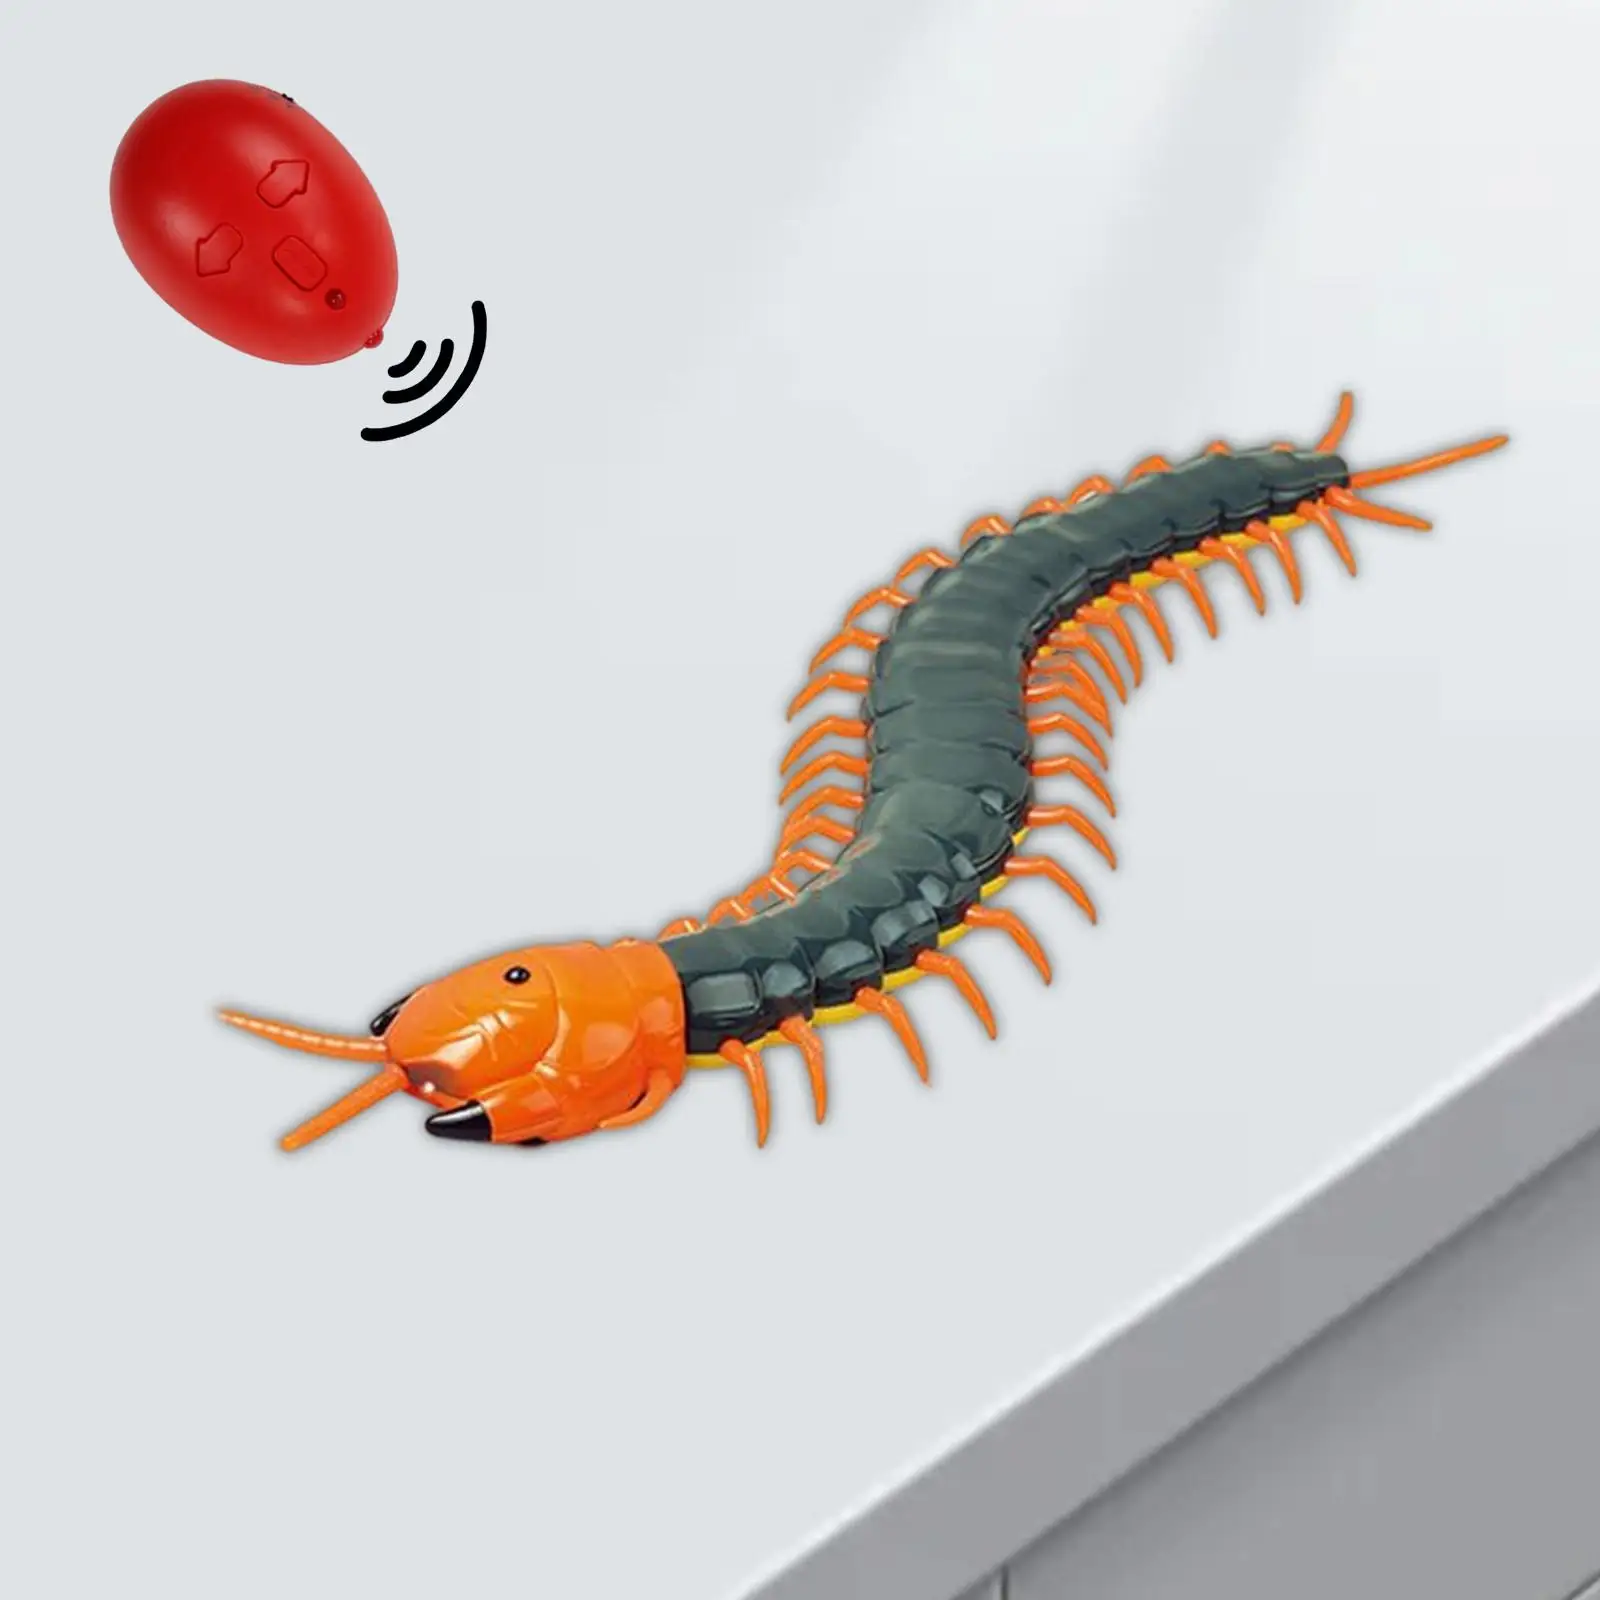 Smart Remote Control Centipede Boys Gifts RC Centipede Insects Toy Remote Control Animal Toy Electric Centipede Toy for Children